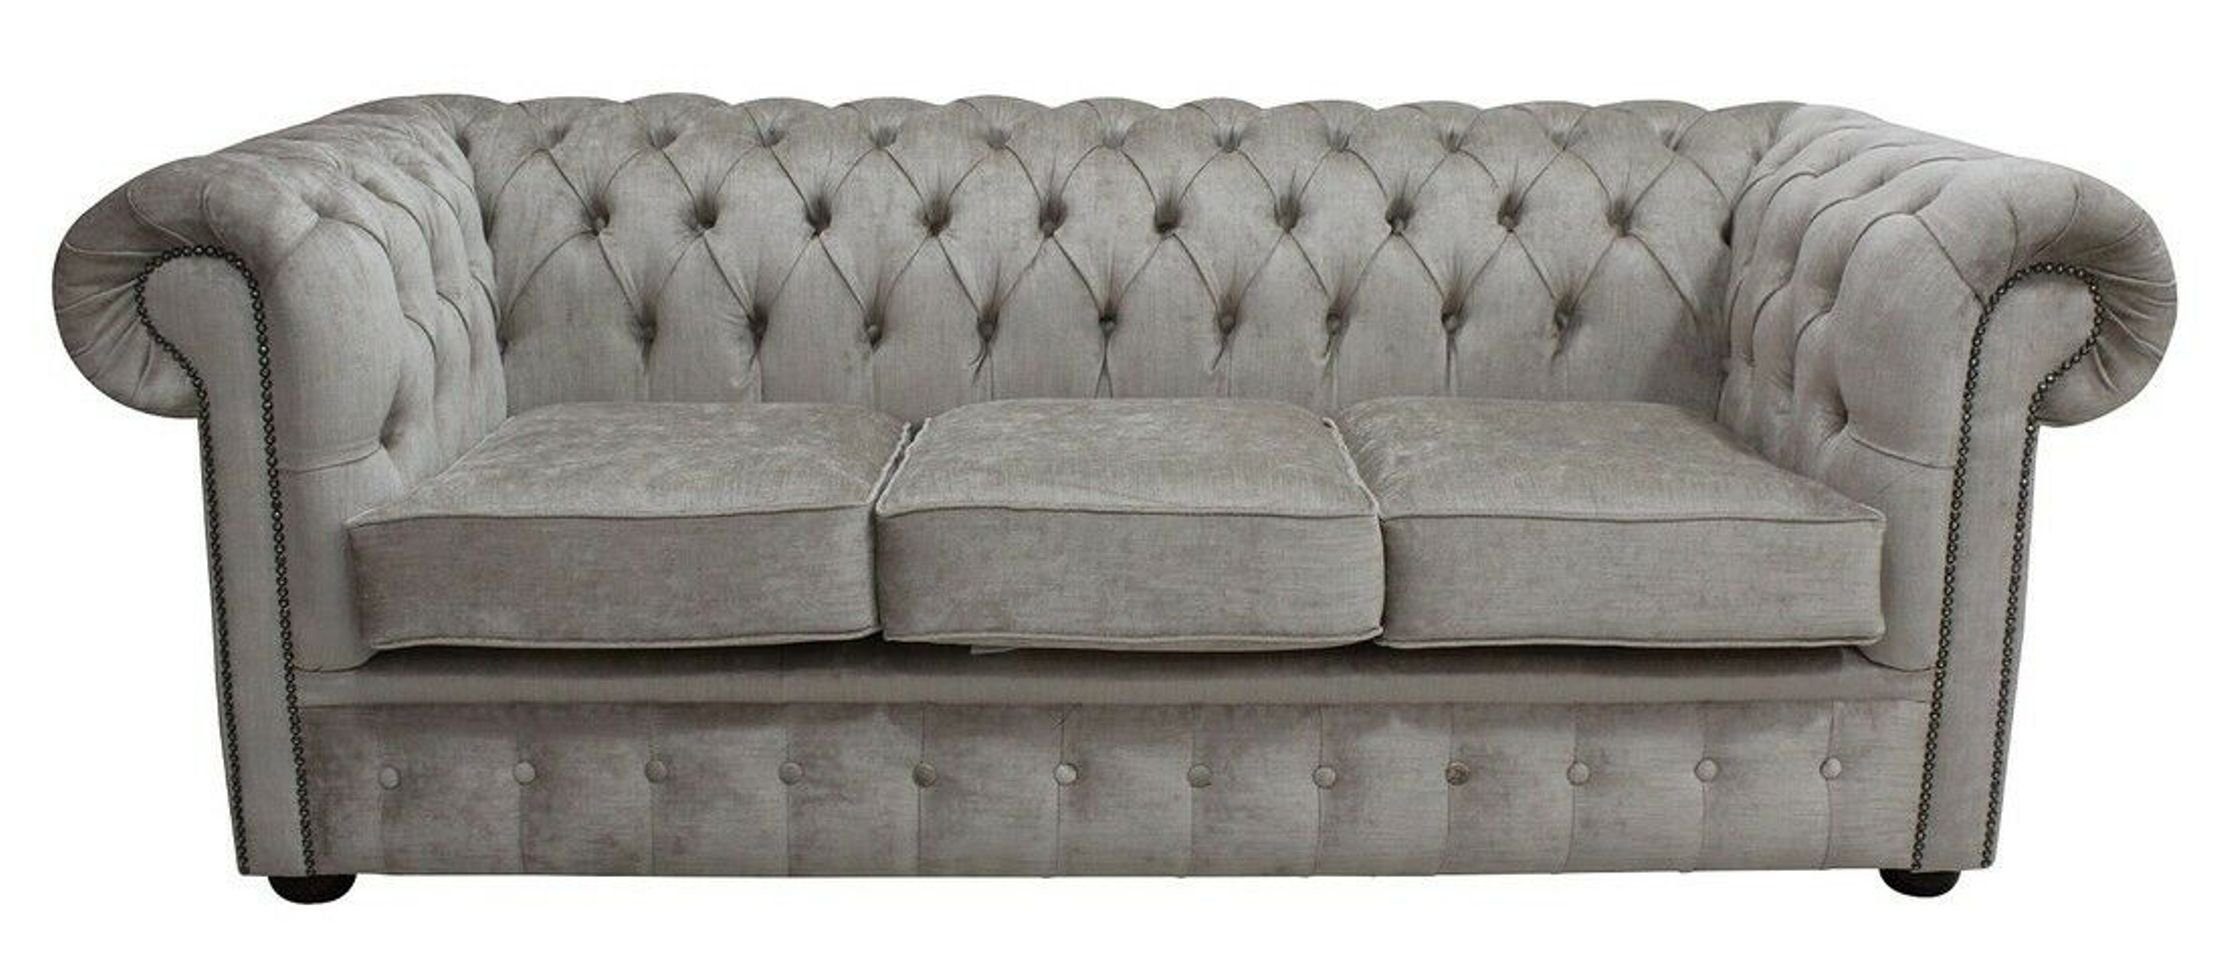 JVmoebel Chesterfield-Sofa, Chesterfield Polster Sofa Design Luxus Couch